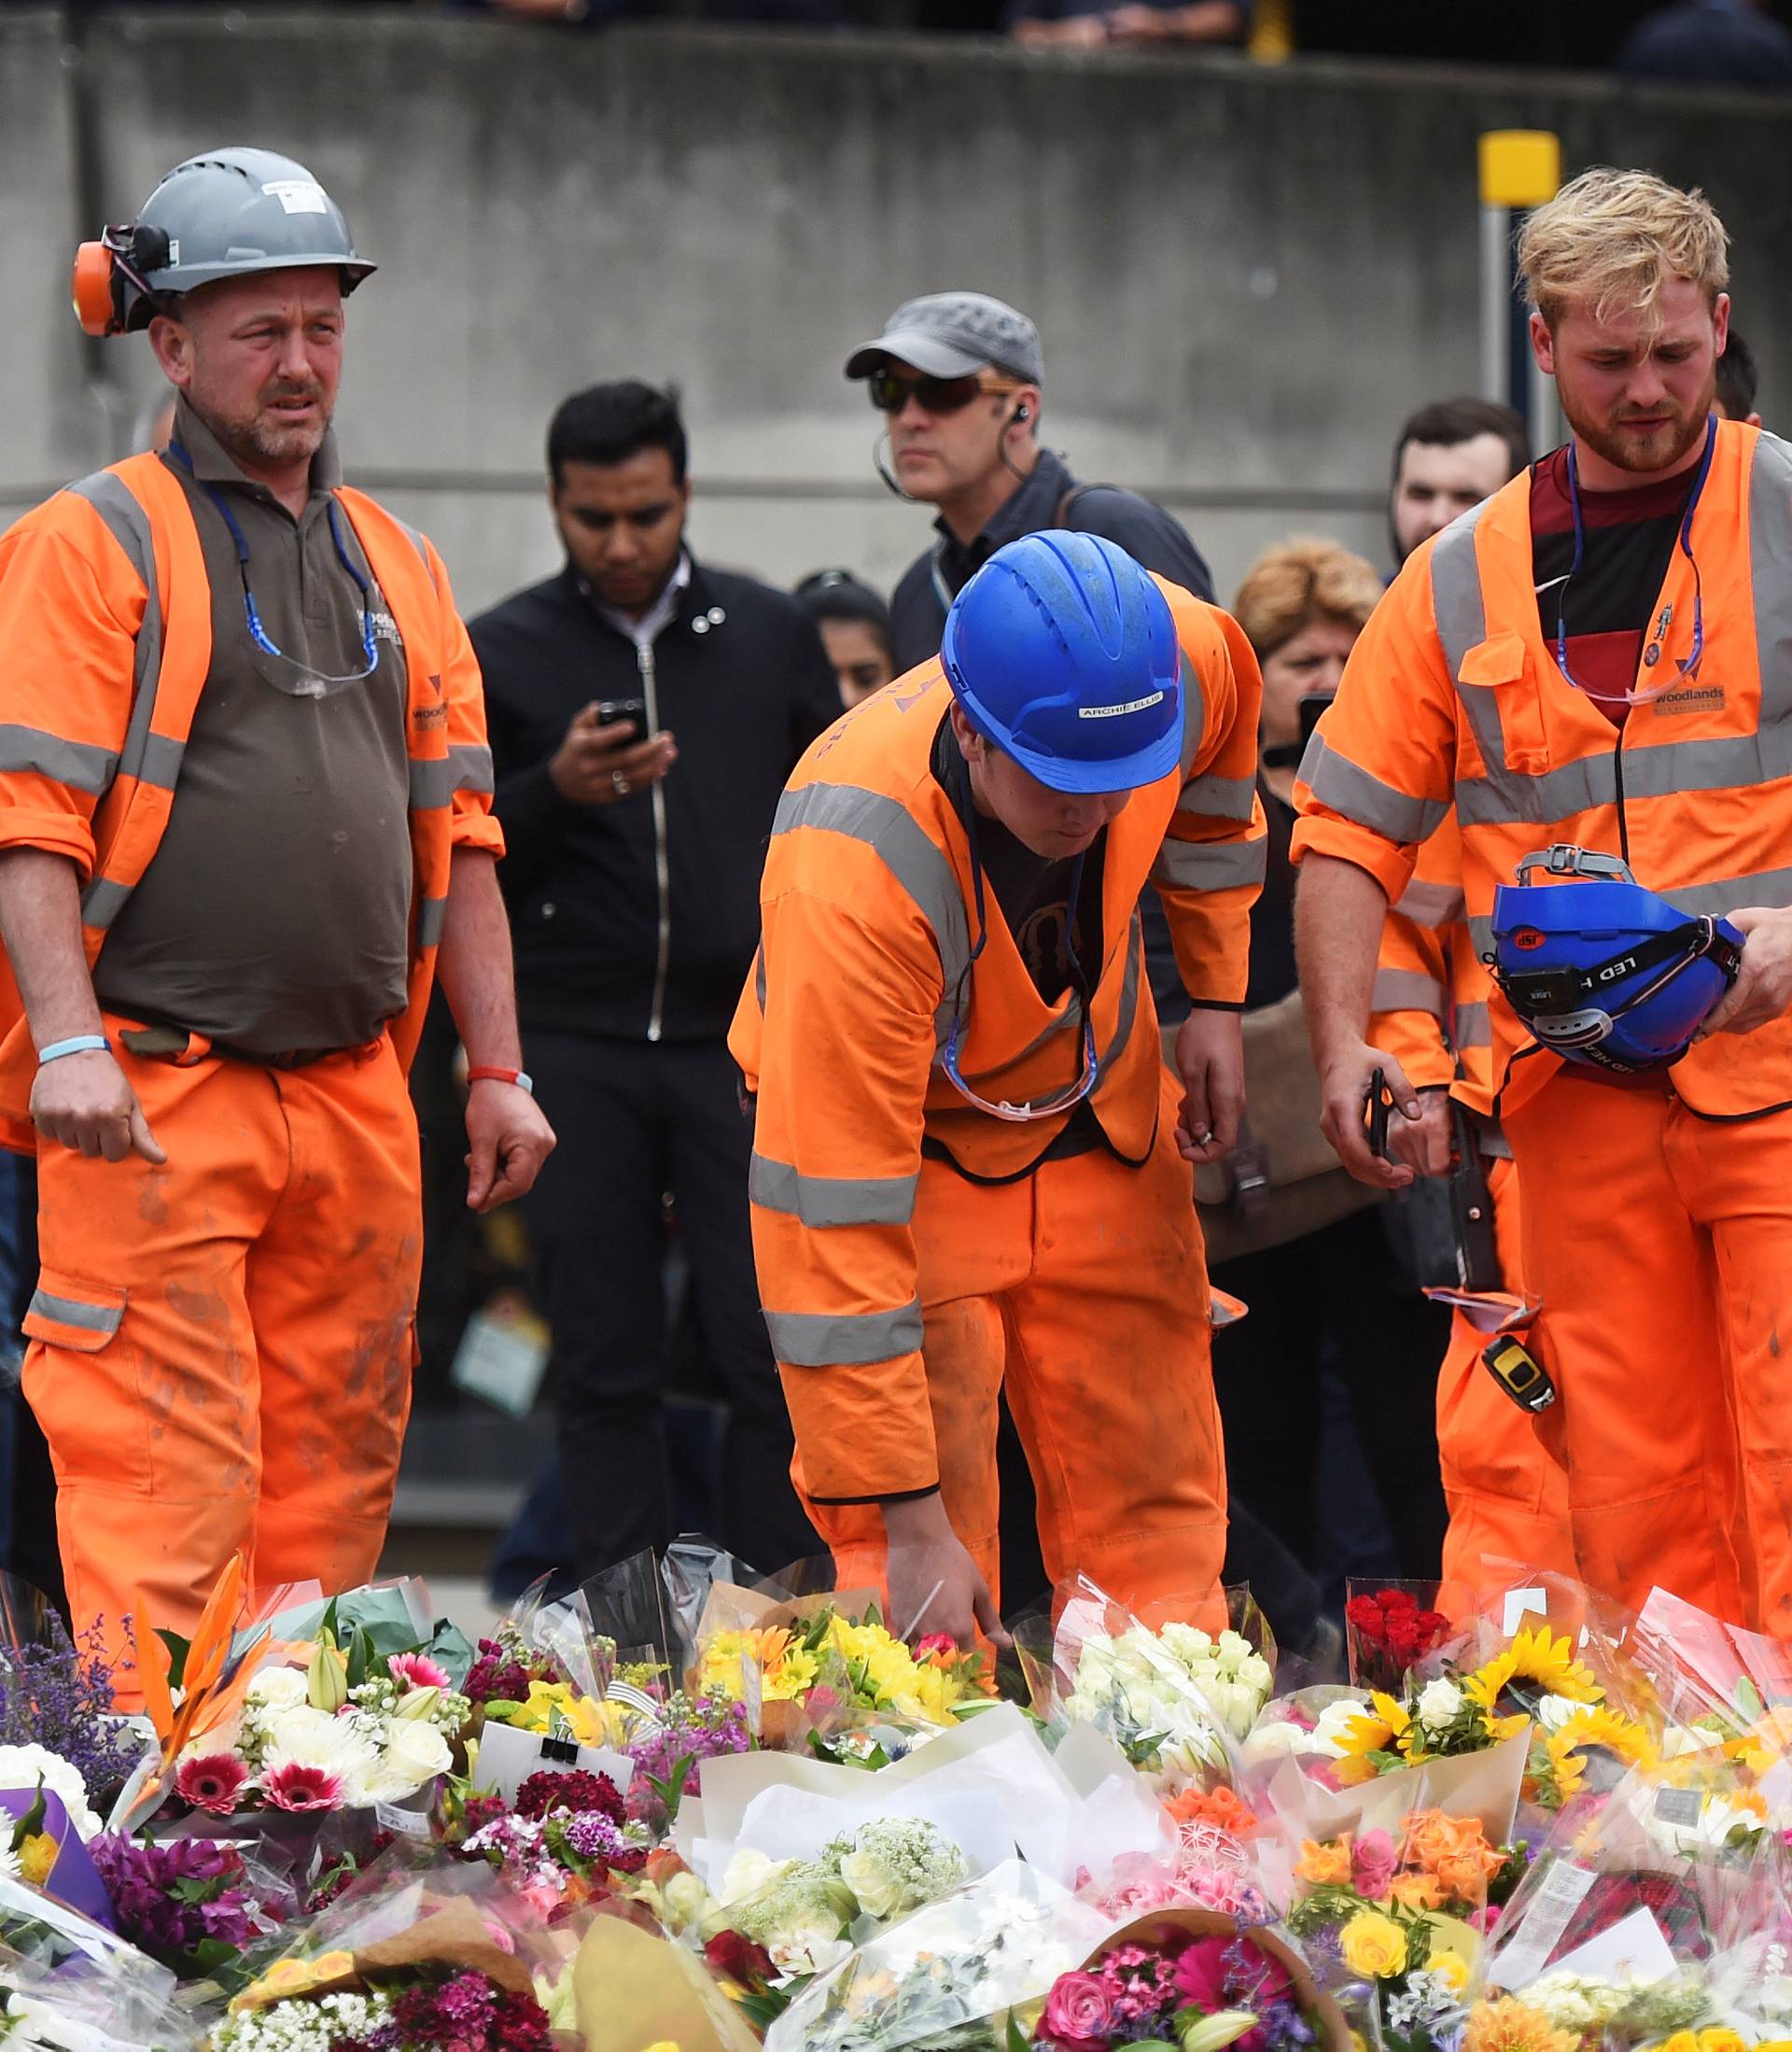 A group of construction workers react as they leave flowers on the south side of London Bridge near Borough Market after an attack left 7 people dead and dozens of injured in London